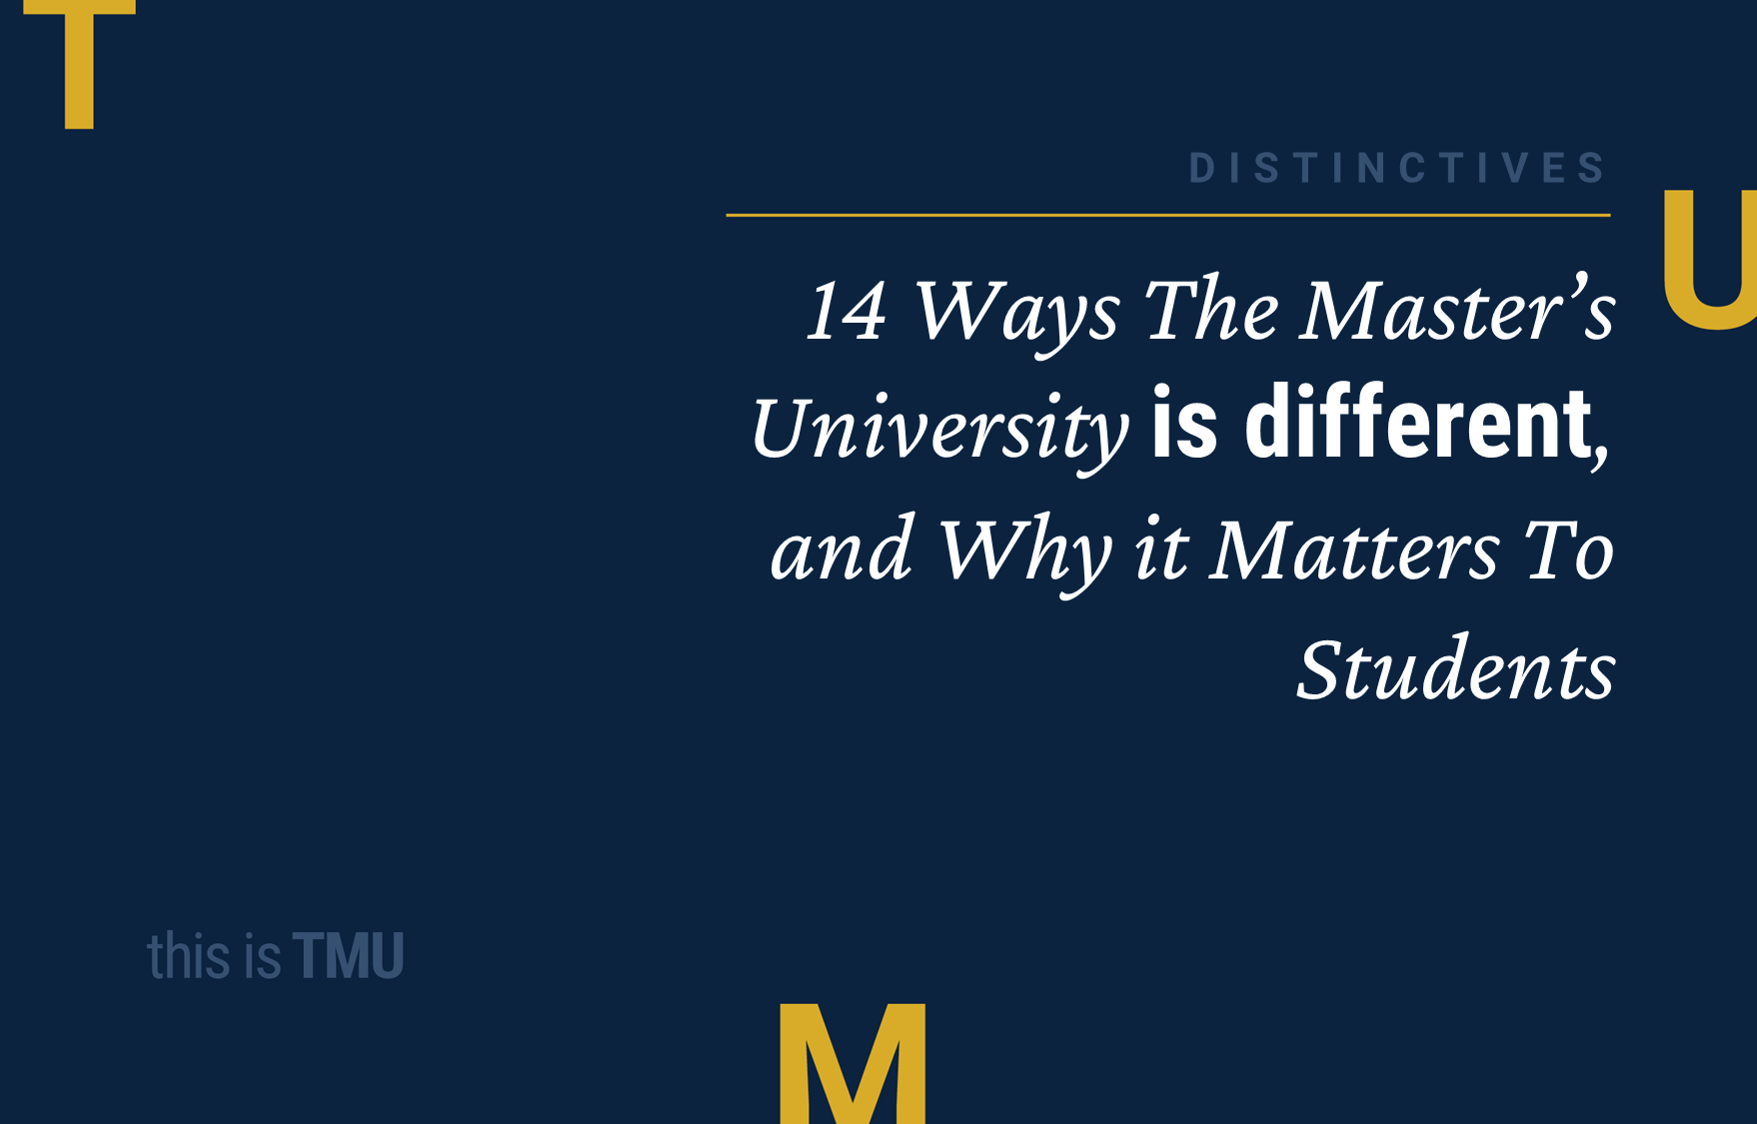 14 Ways TMU is Different, and Why it Matters To Students